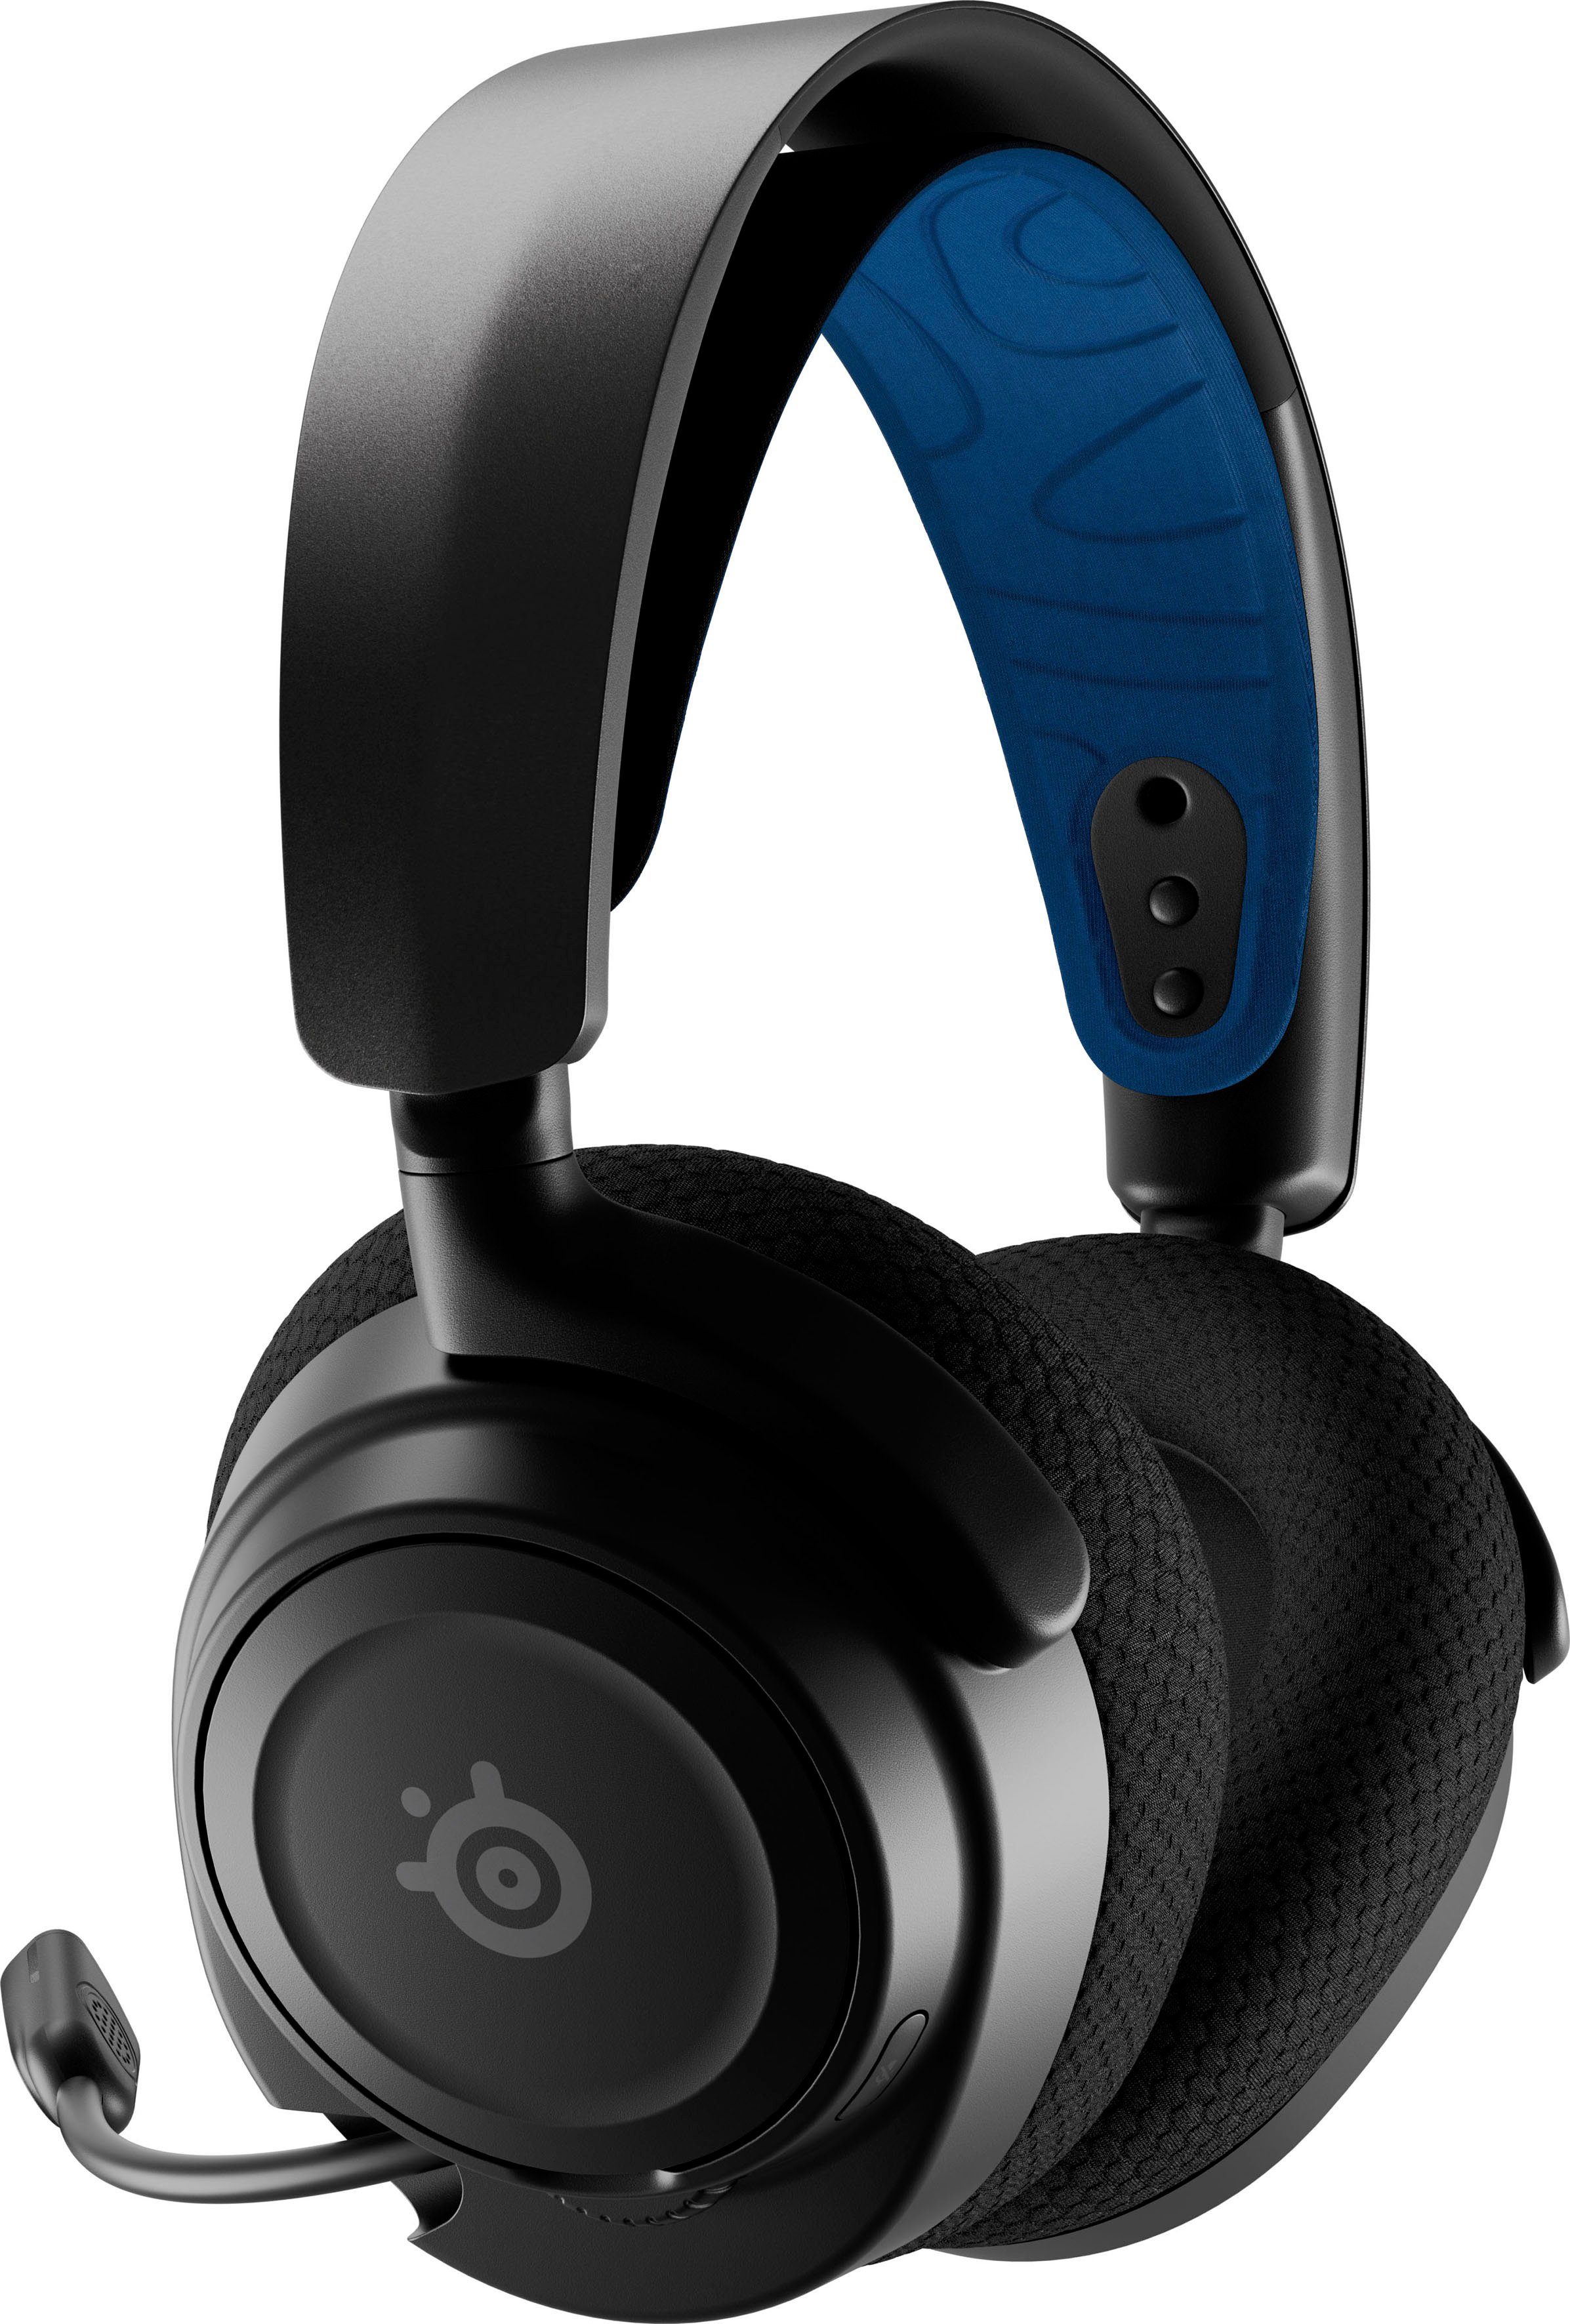 Wireless) SteelSeries Arctis Nova 7P Bluetooth, (Noise-Cancelling, Gaming-Headset